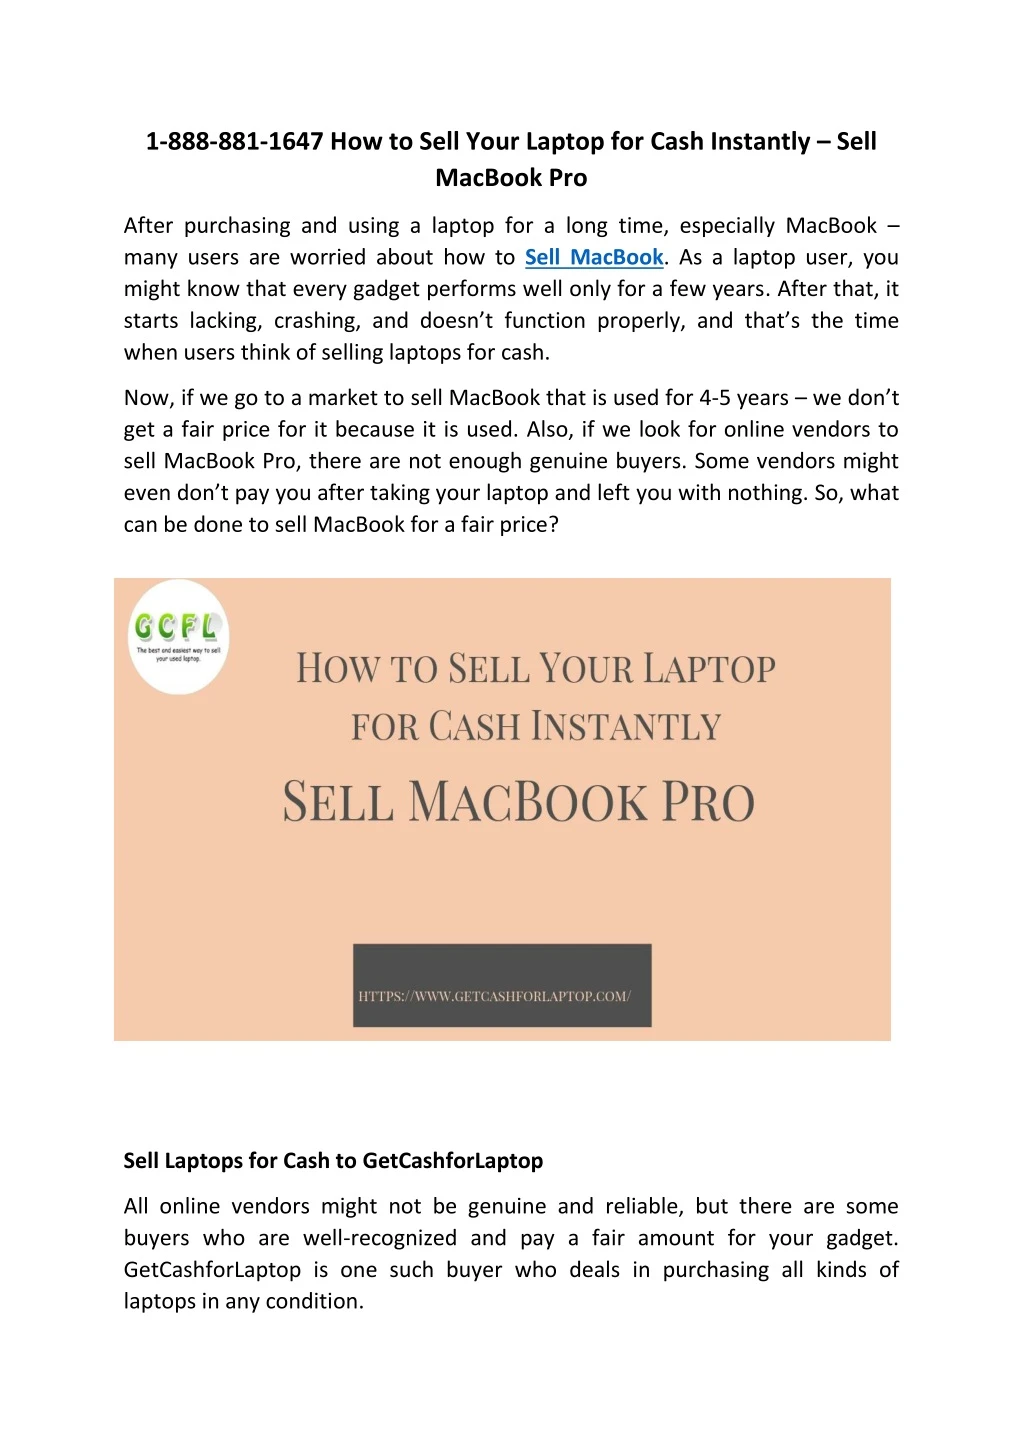 1 888 881 1647 how to sell your laptop for cash